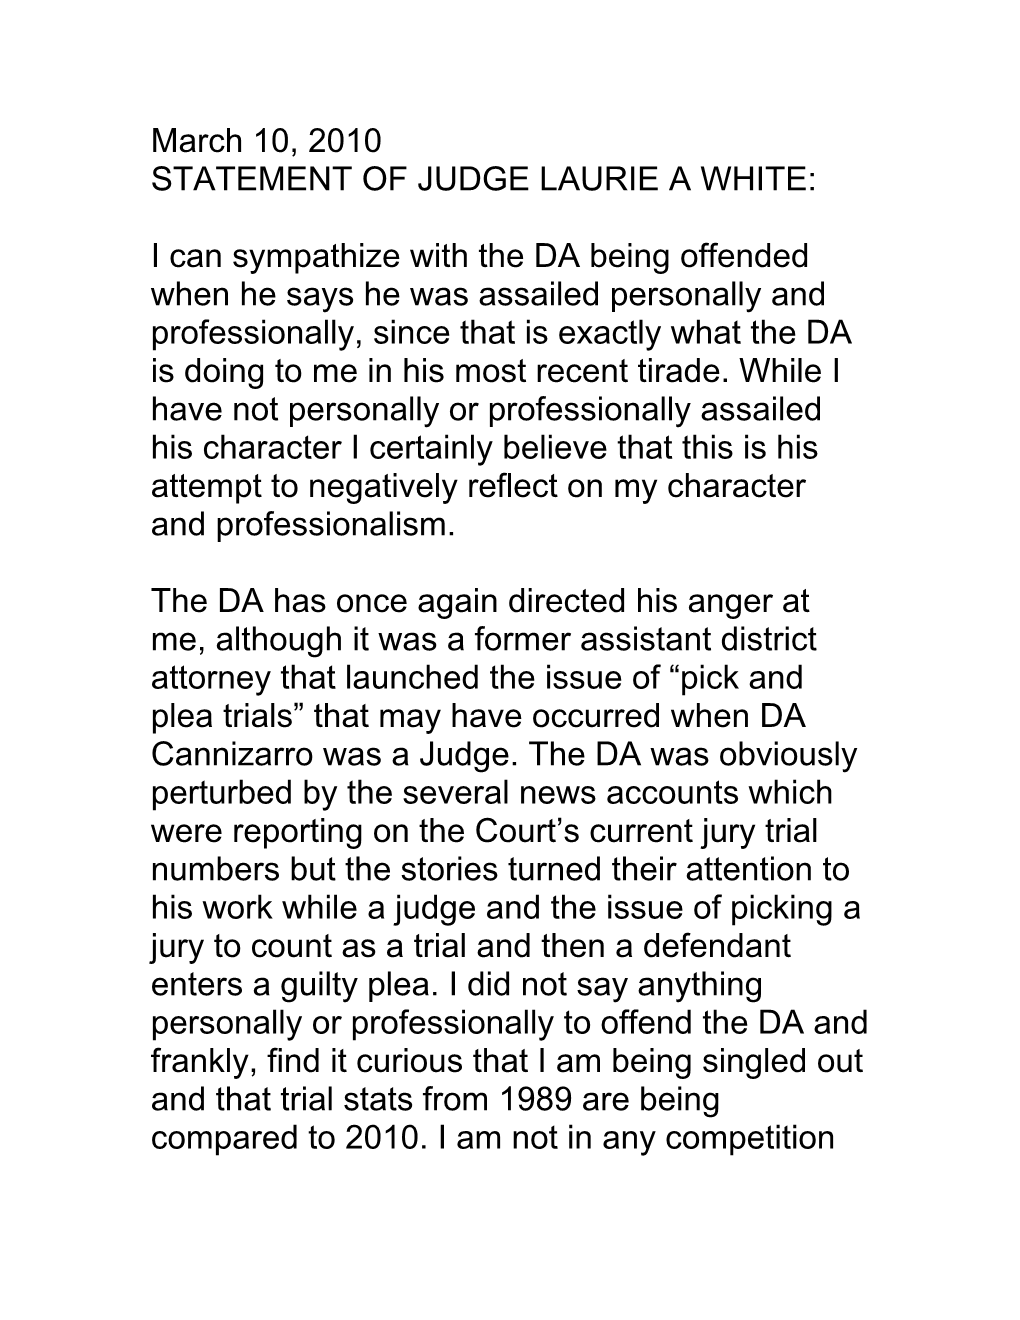 Statement of Judge Laurie a White